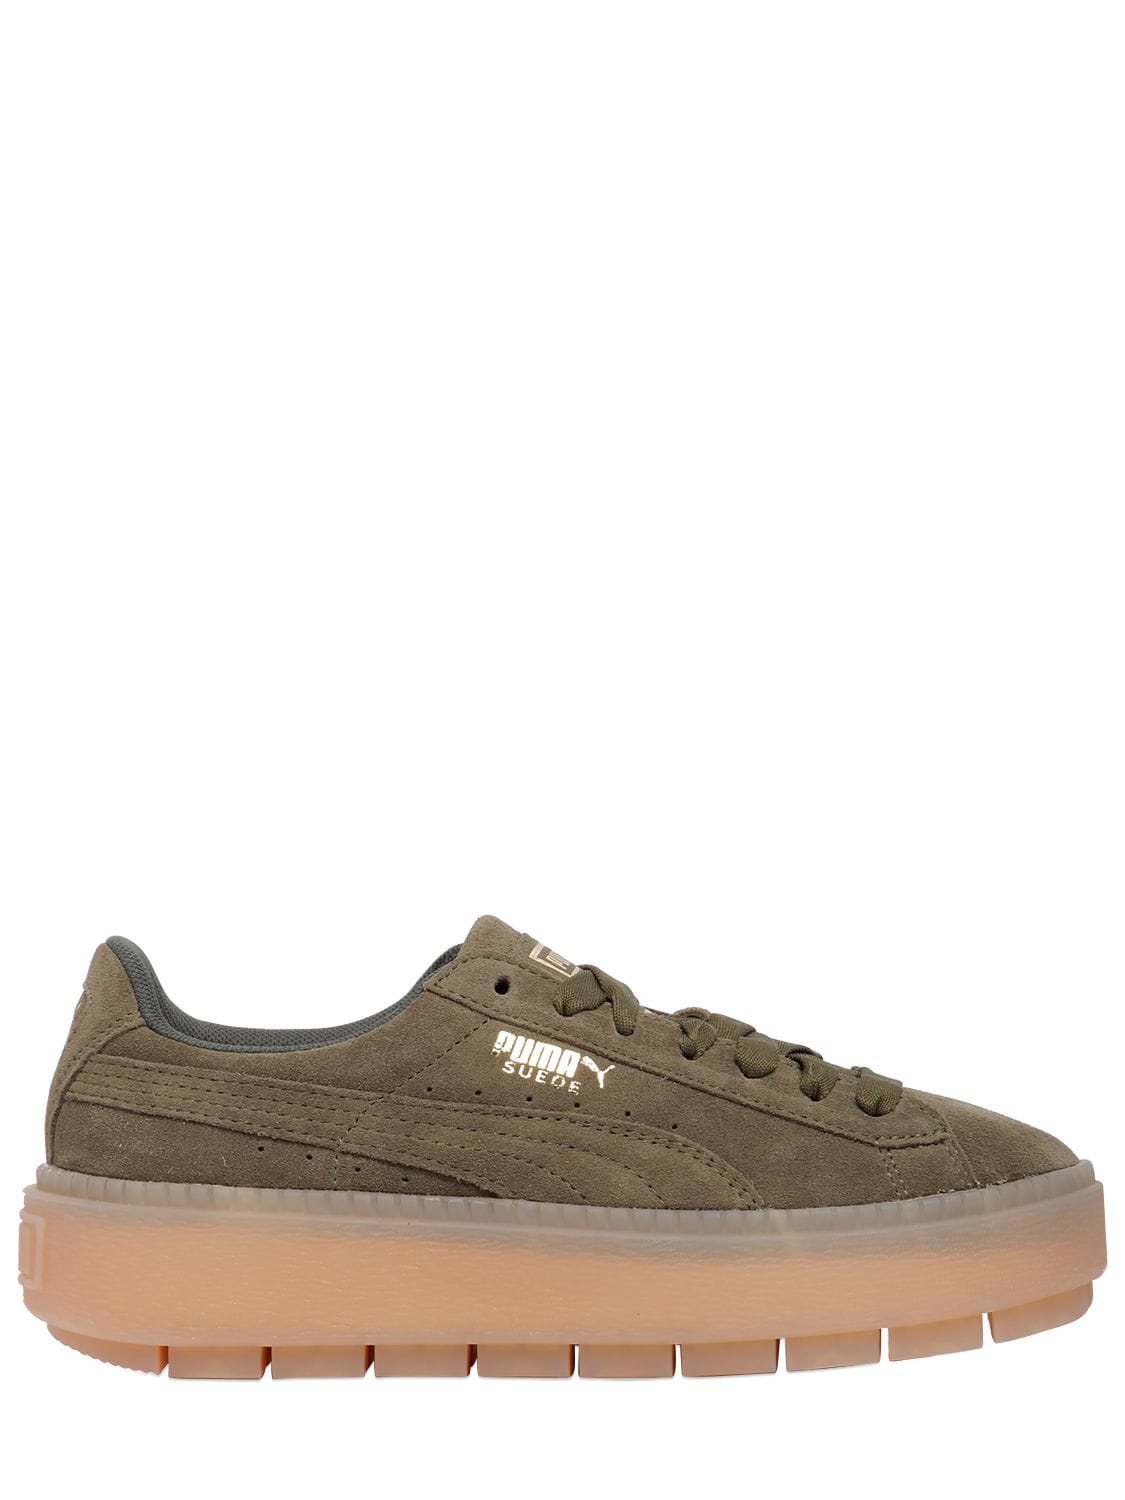 Puma Rugged Suede Platform Sneakers In Army Green